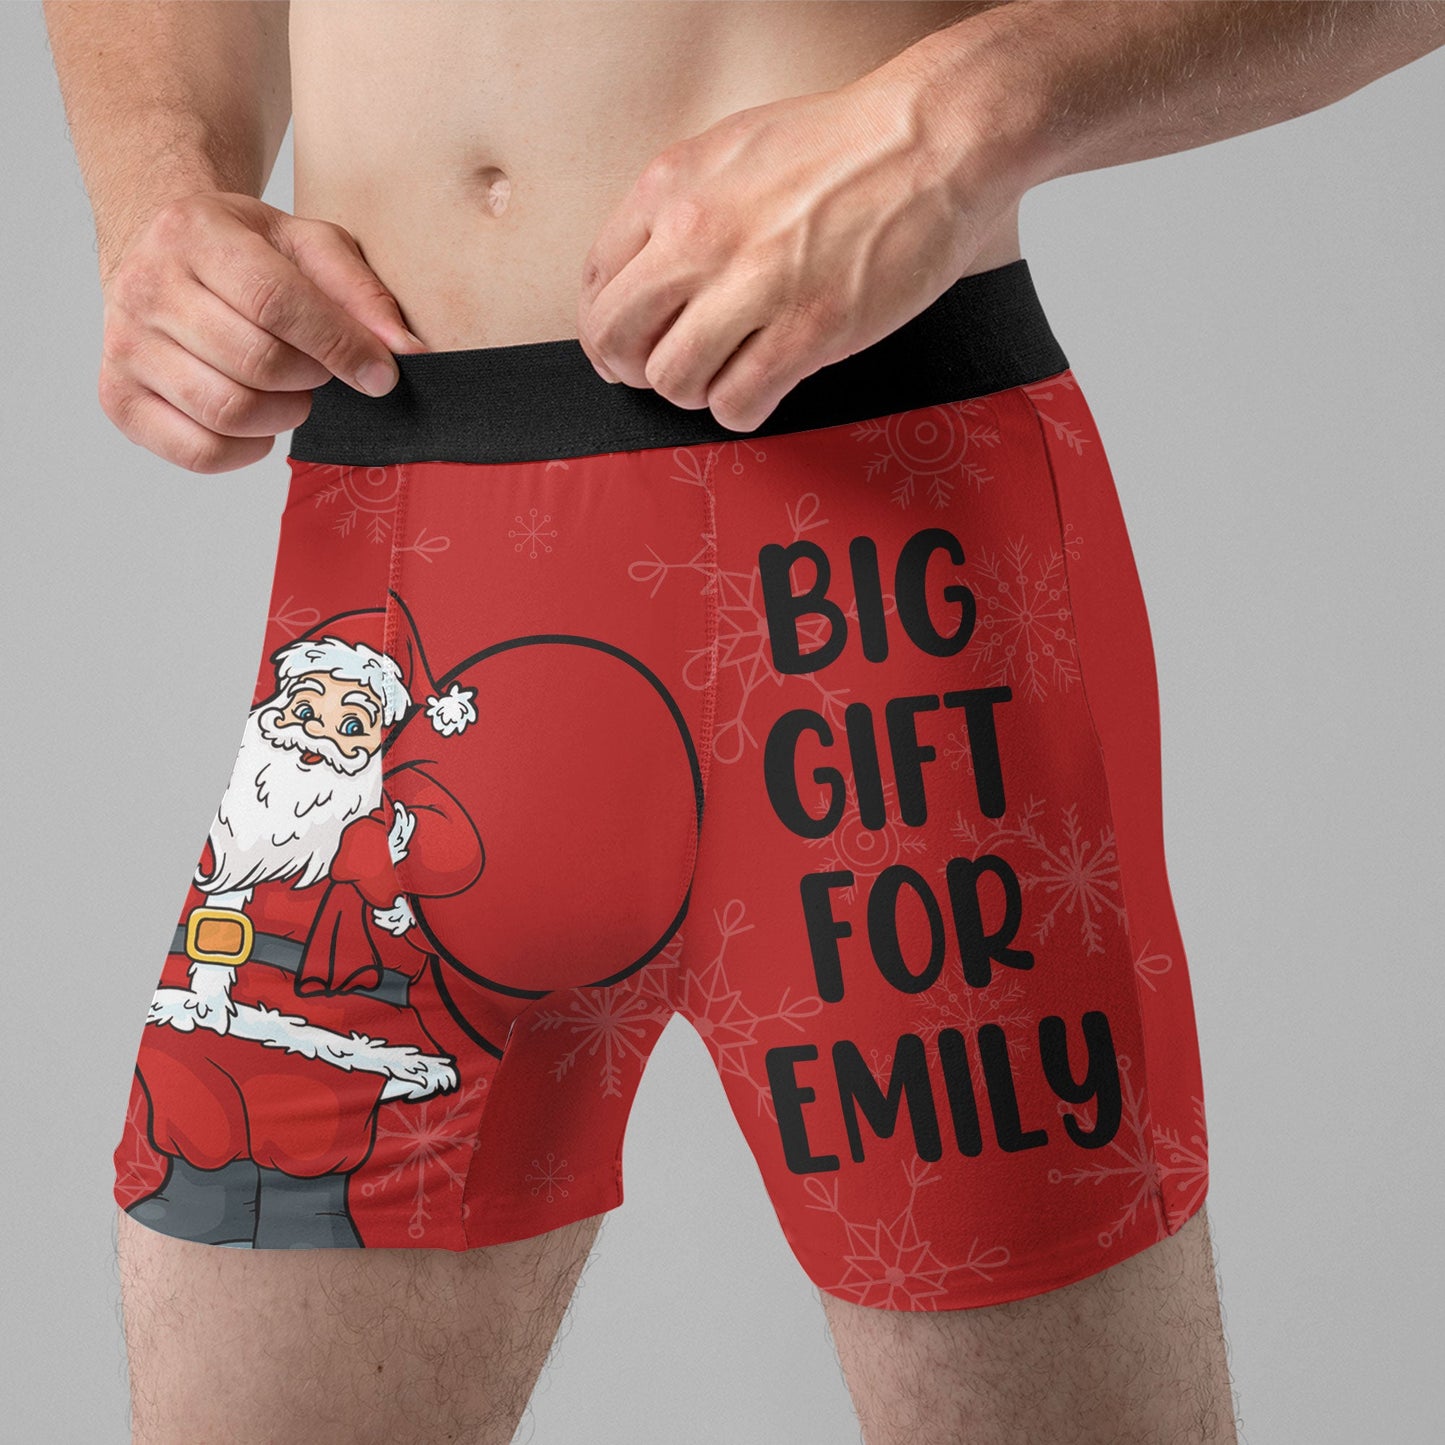 Glohox Personalized Funny Christmas Boxers For Men,Custom Boxers for Men  Boyfriend,Mens Underwear Boxer Briefs Pack Funny Boxers at  Men's  Clothing store